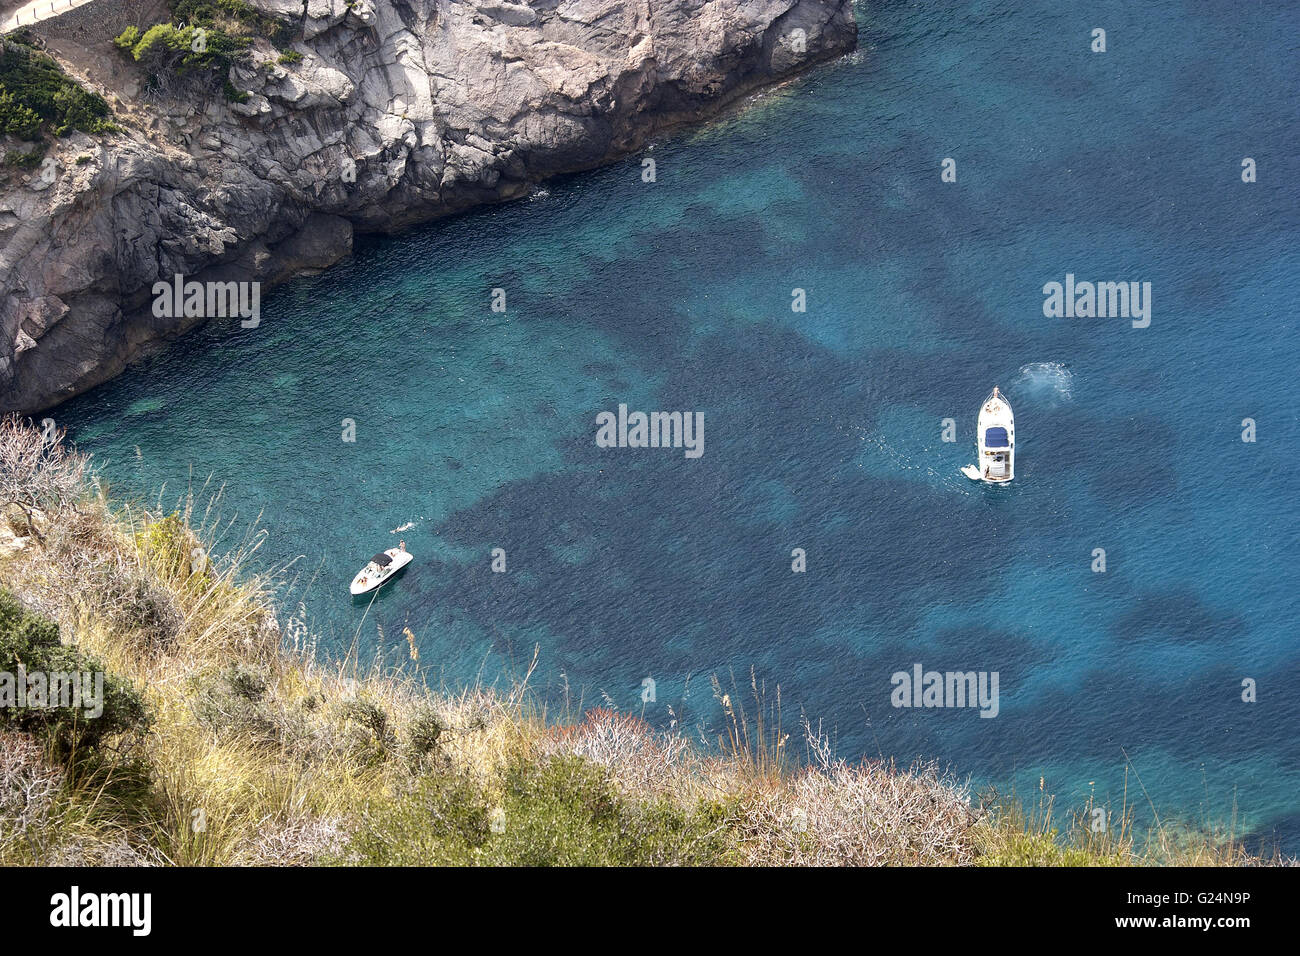 a beautiful picture of a harbour from a high viewpoint with 2 small boats, vegetation and rocks in Palma de Mallorca, Spain Stock Photo